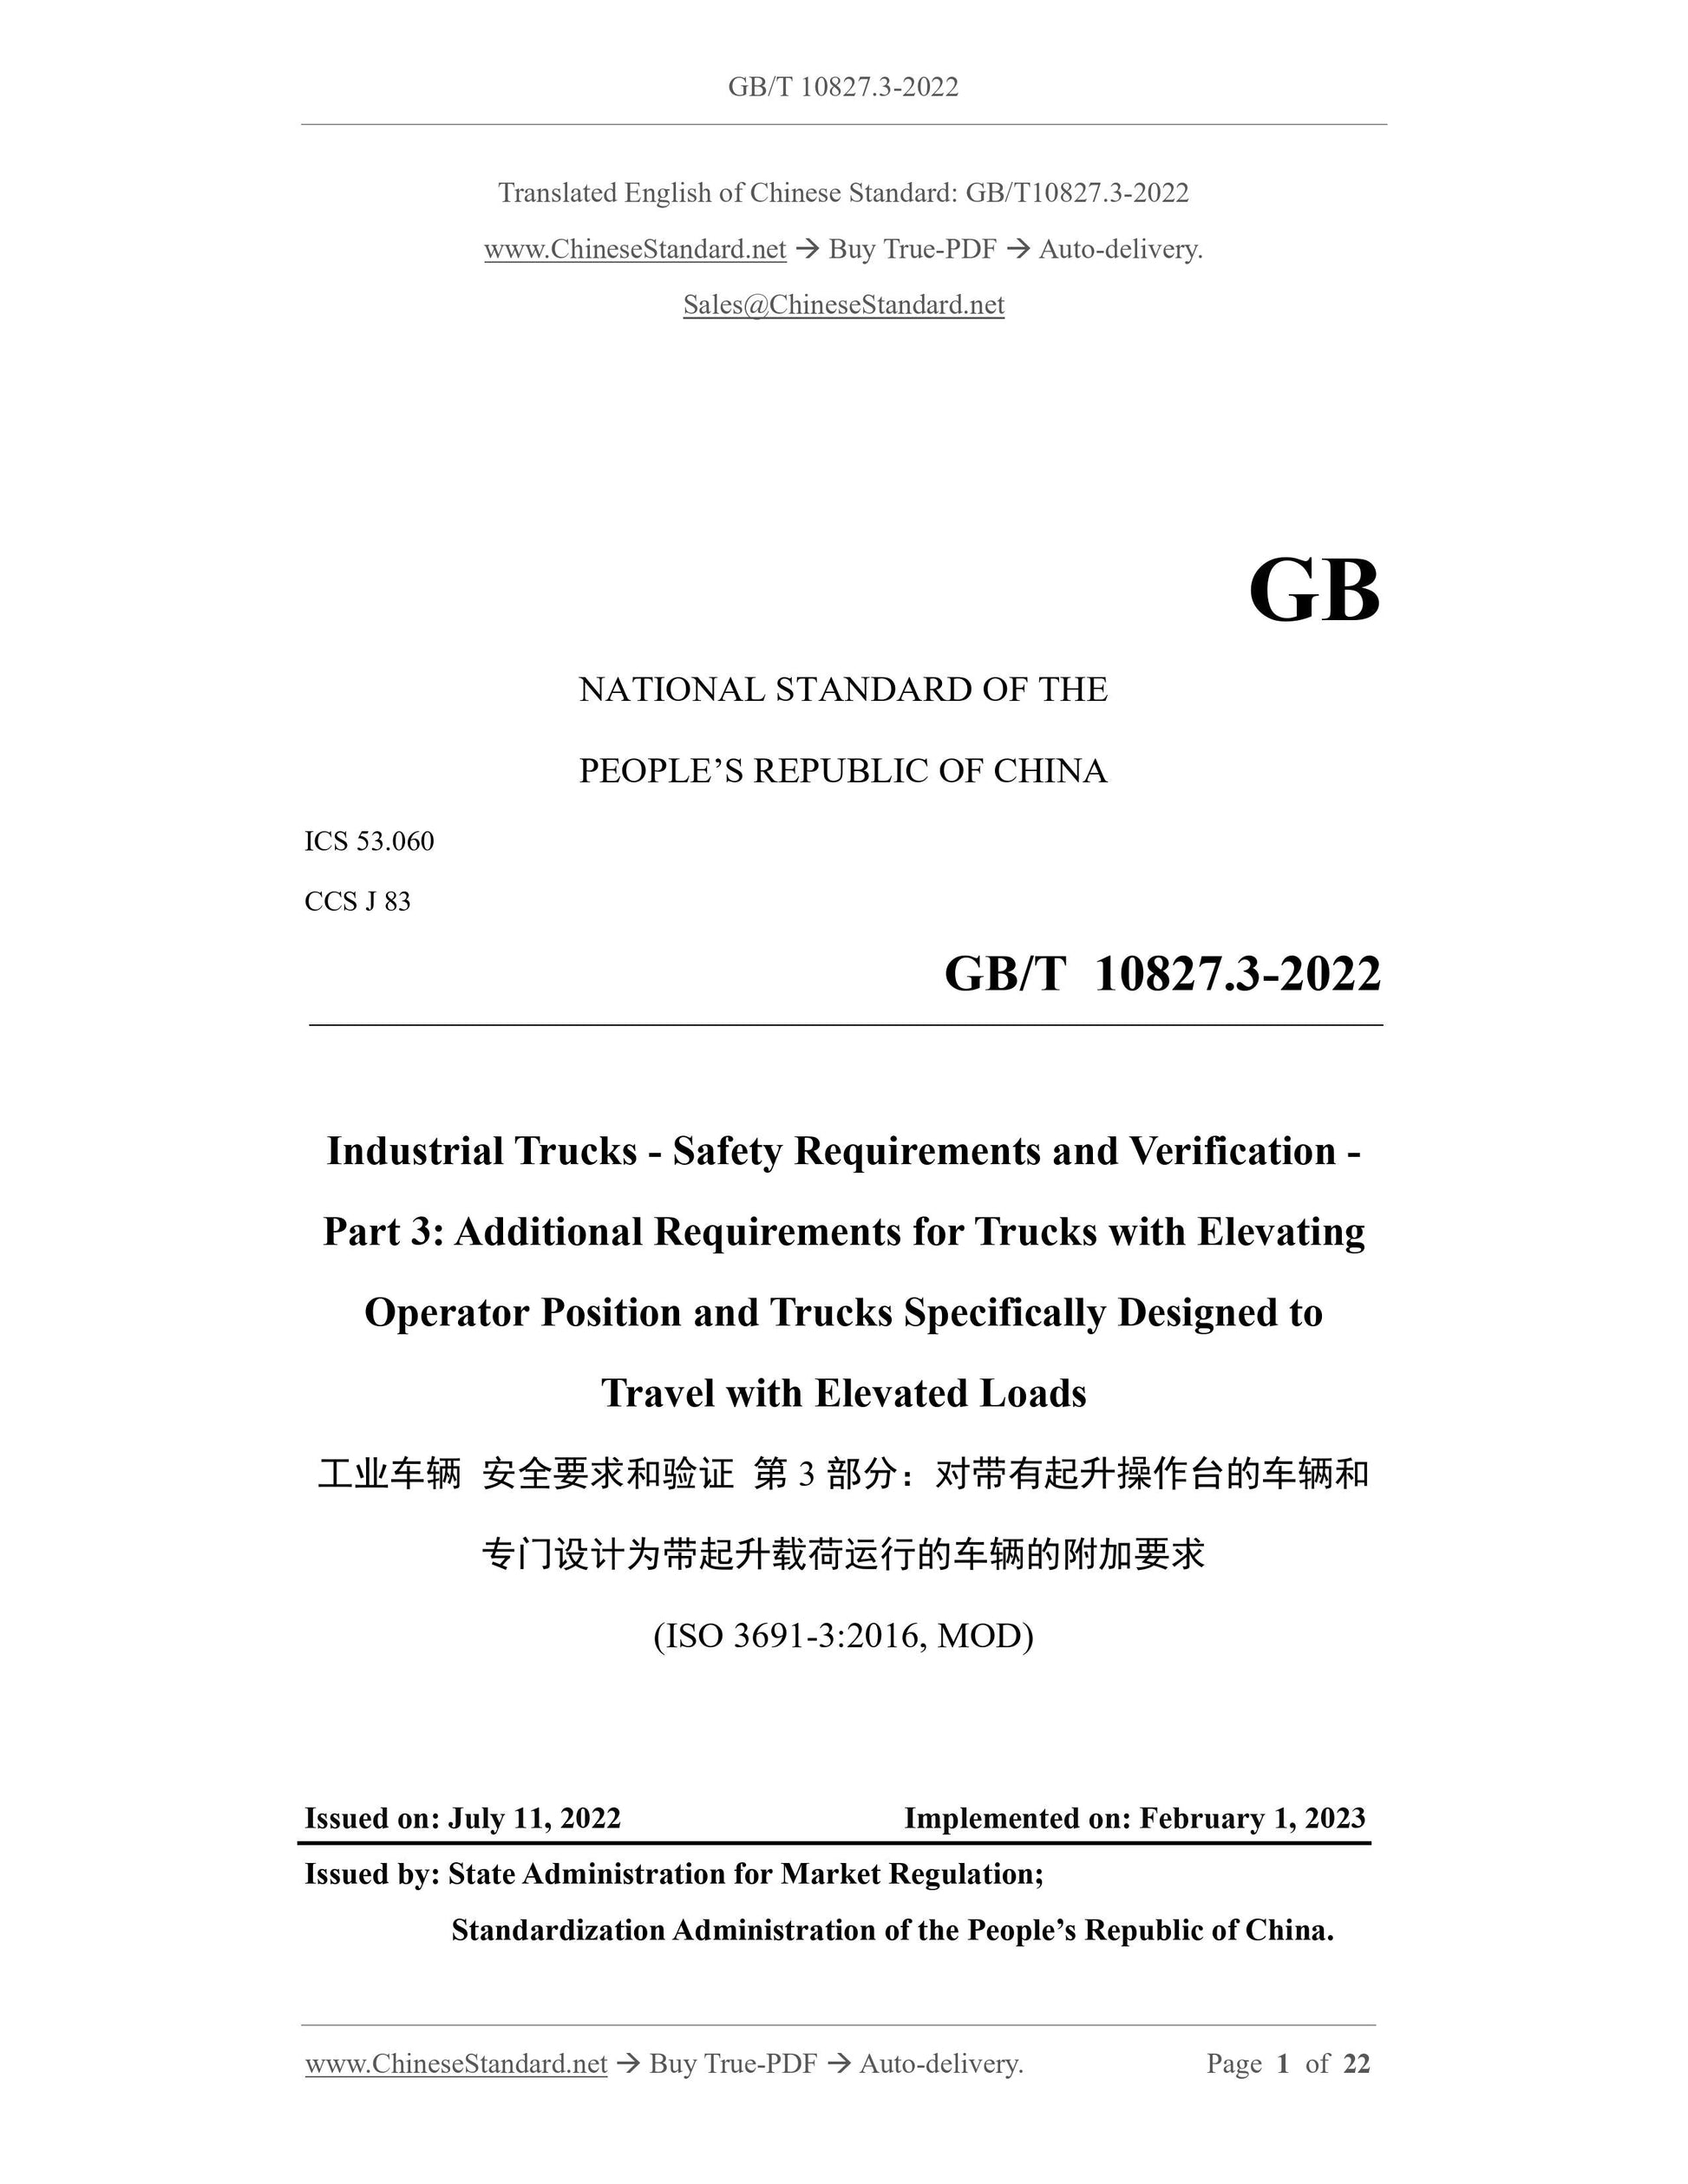 GB/T 10827.3-2022 Page 1